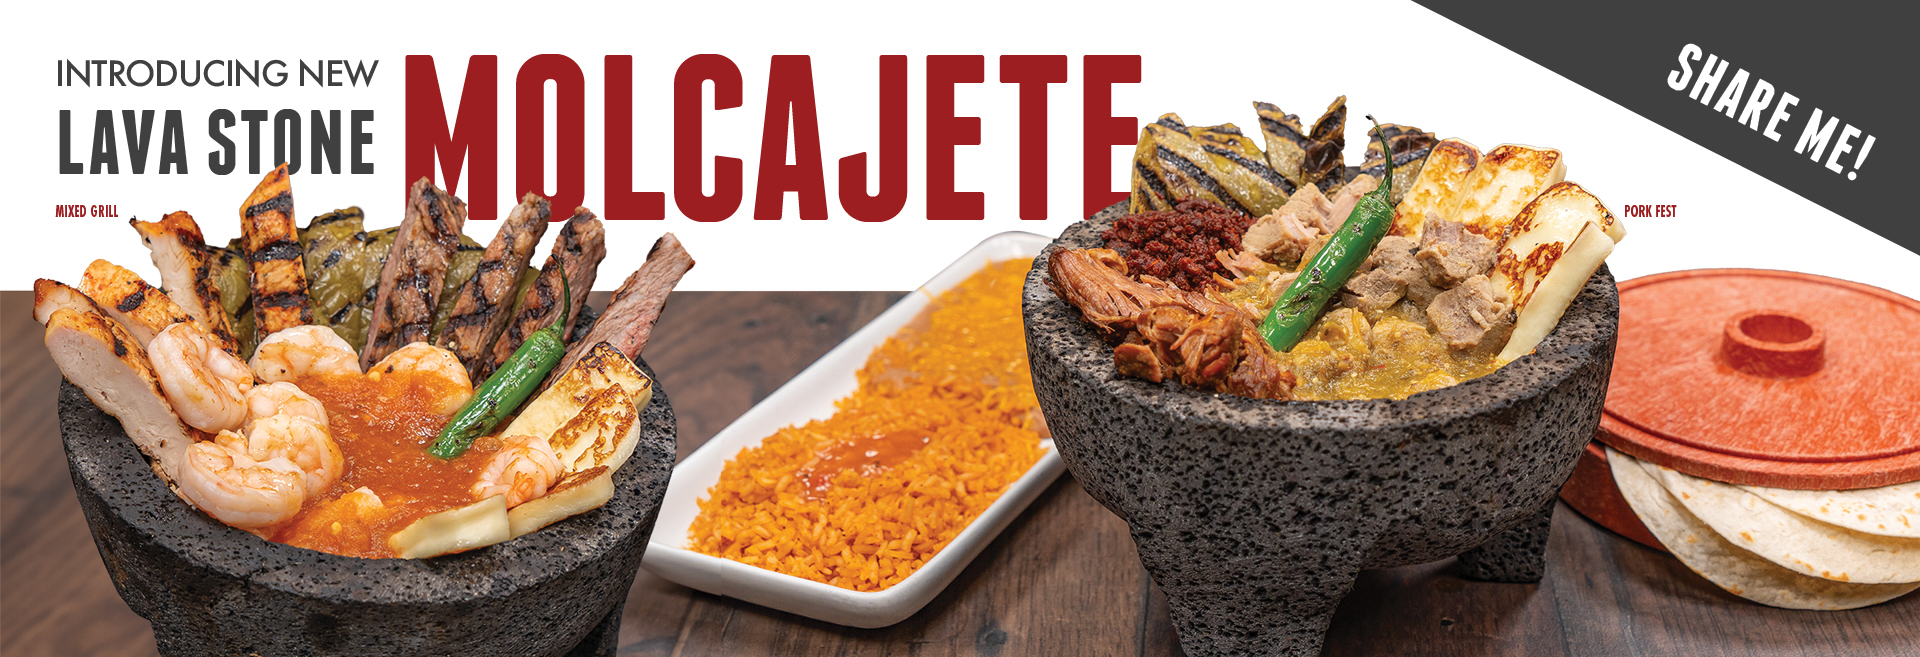 Promotional image featuring two versions of the Lava Stone Molcajete dish. On the left, the Mixed Grill Molcajete contains marinated chicken breast, steak, grilled shrimp, and nopales. On the right, the Pork Fest Molcajete is filled with various pork cuts, nopales, and is topped with red chili sauce. Both are served with a side of rice and a stack of tortillas, with the phrase "SHARE ME!" encouraging communal dining. The header reads "INTRODUCING NEW LAVA STONE MOLCAJETE" in bold letters.